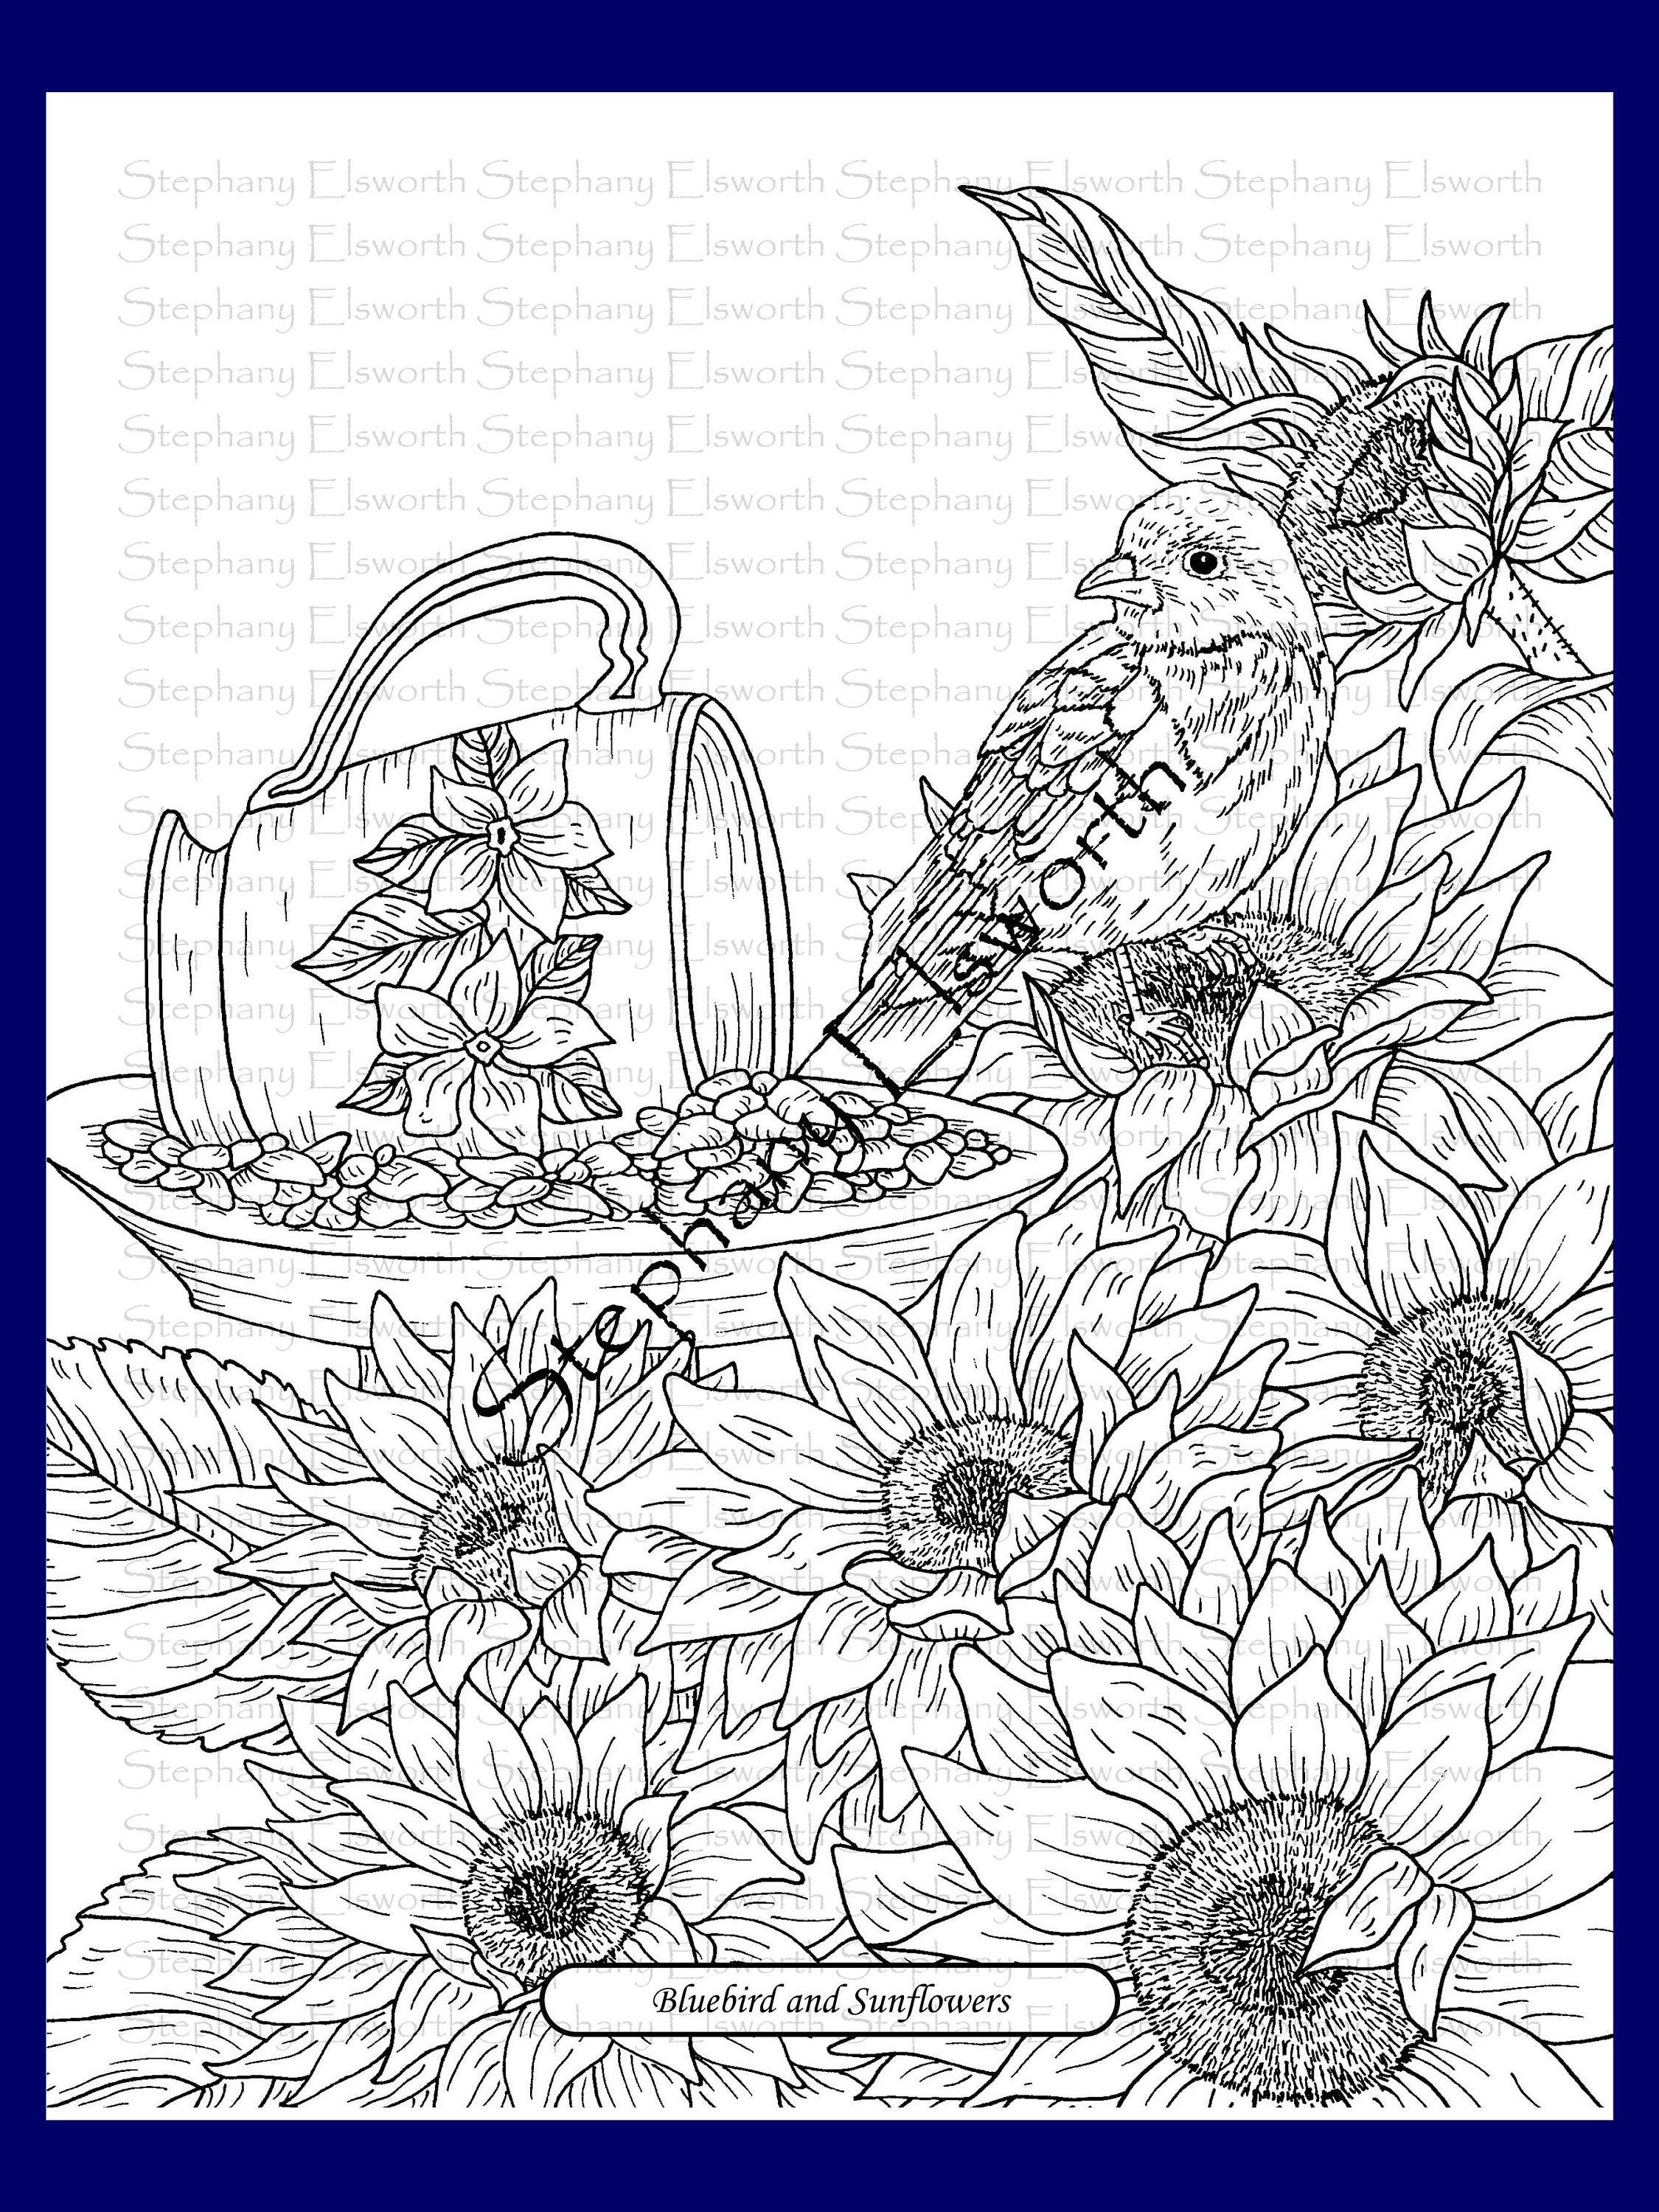 Bluebird and Sunflowers 200 200/20 x 200200 Instant Download Printable Coloring Page